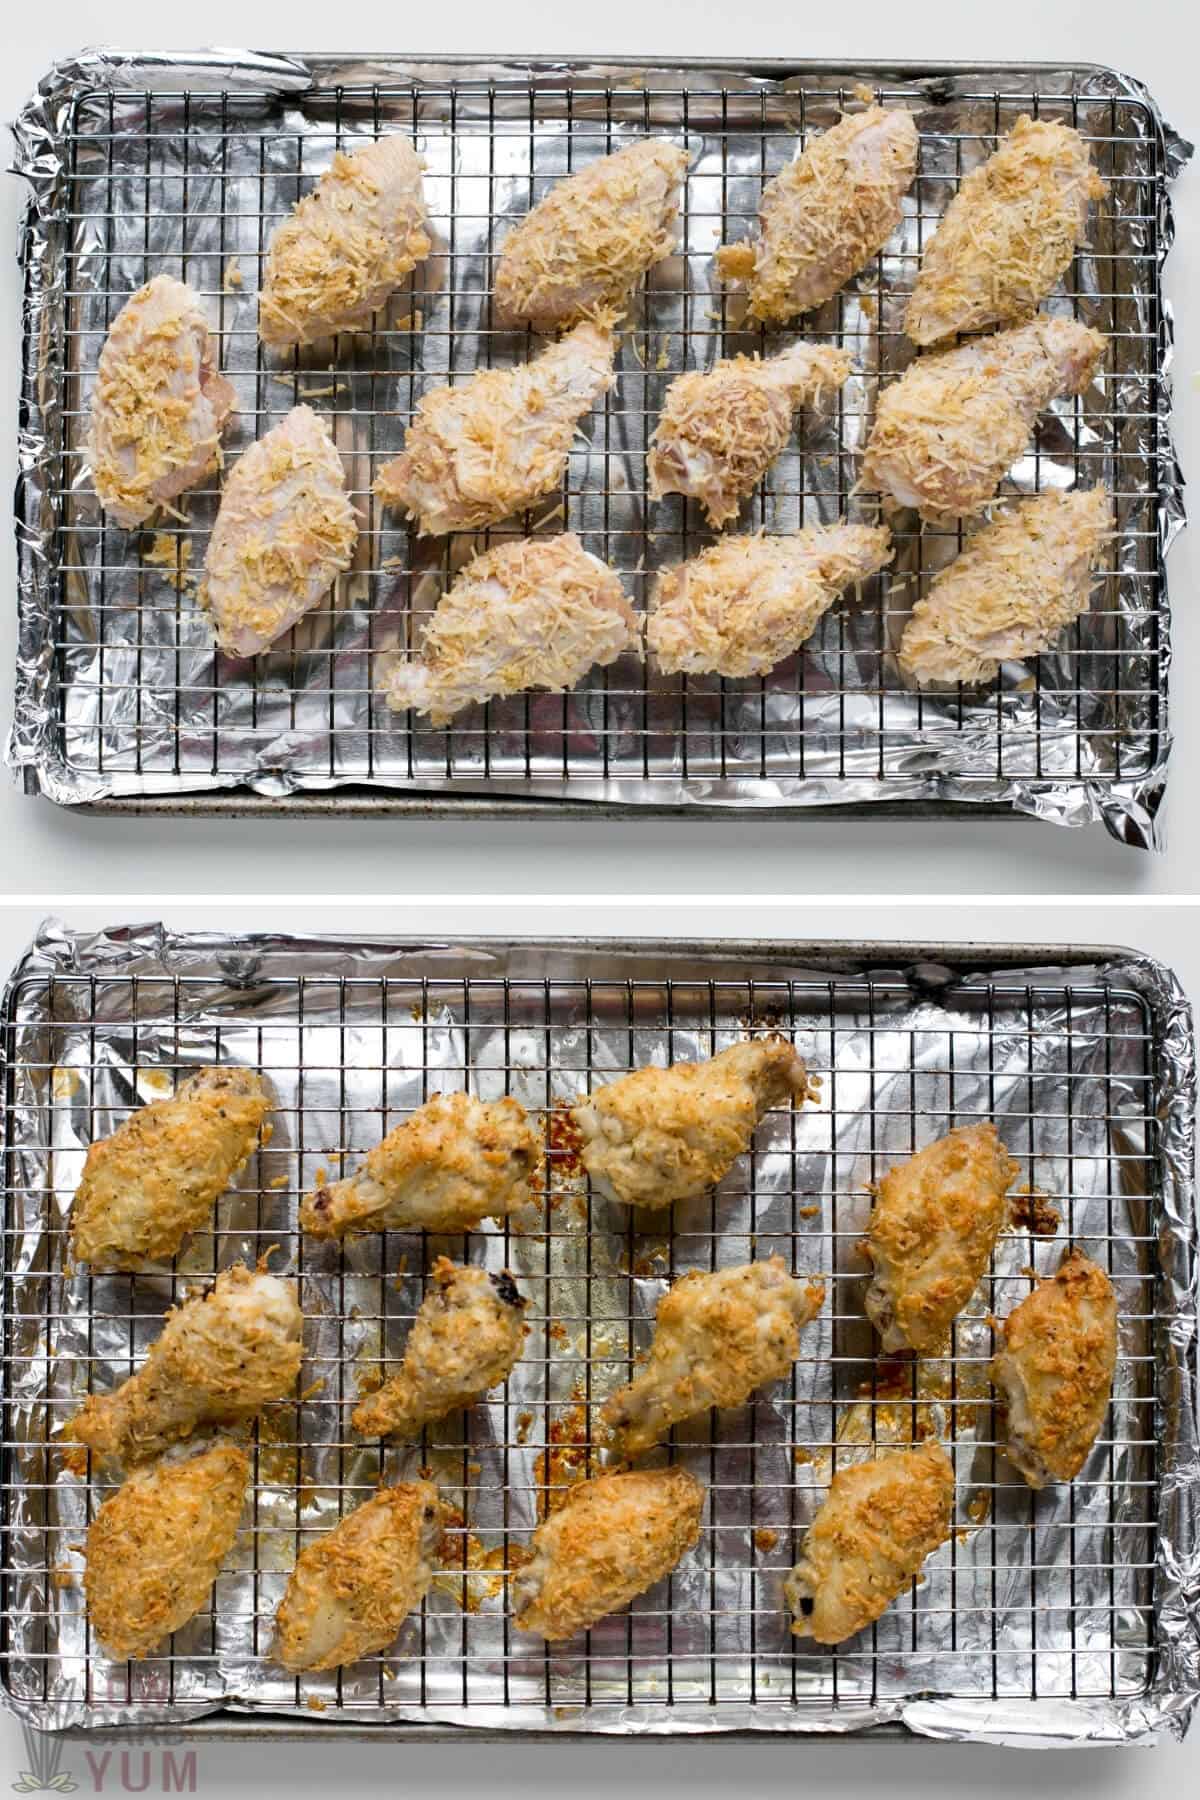 baking the coated chicken wings